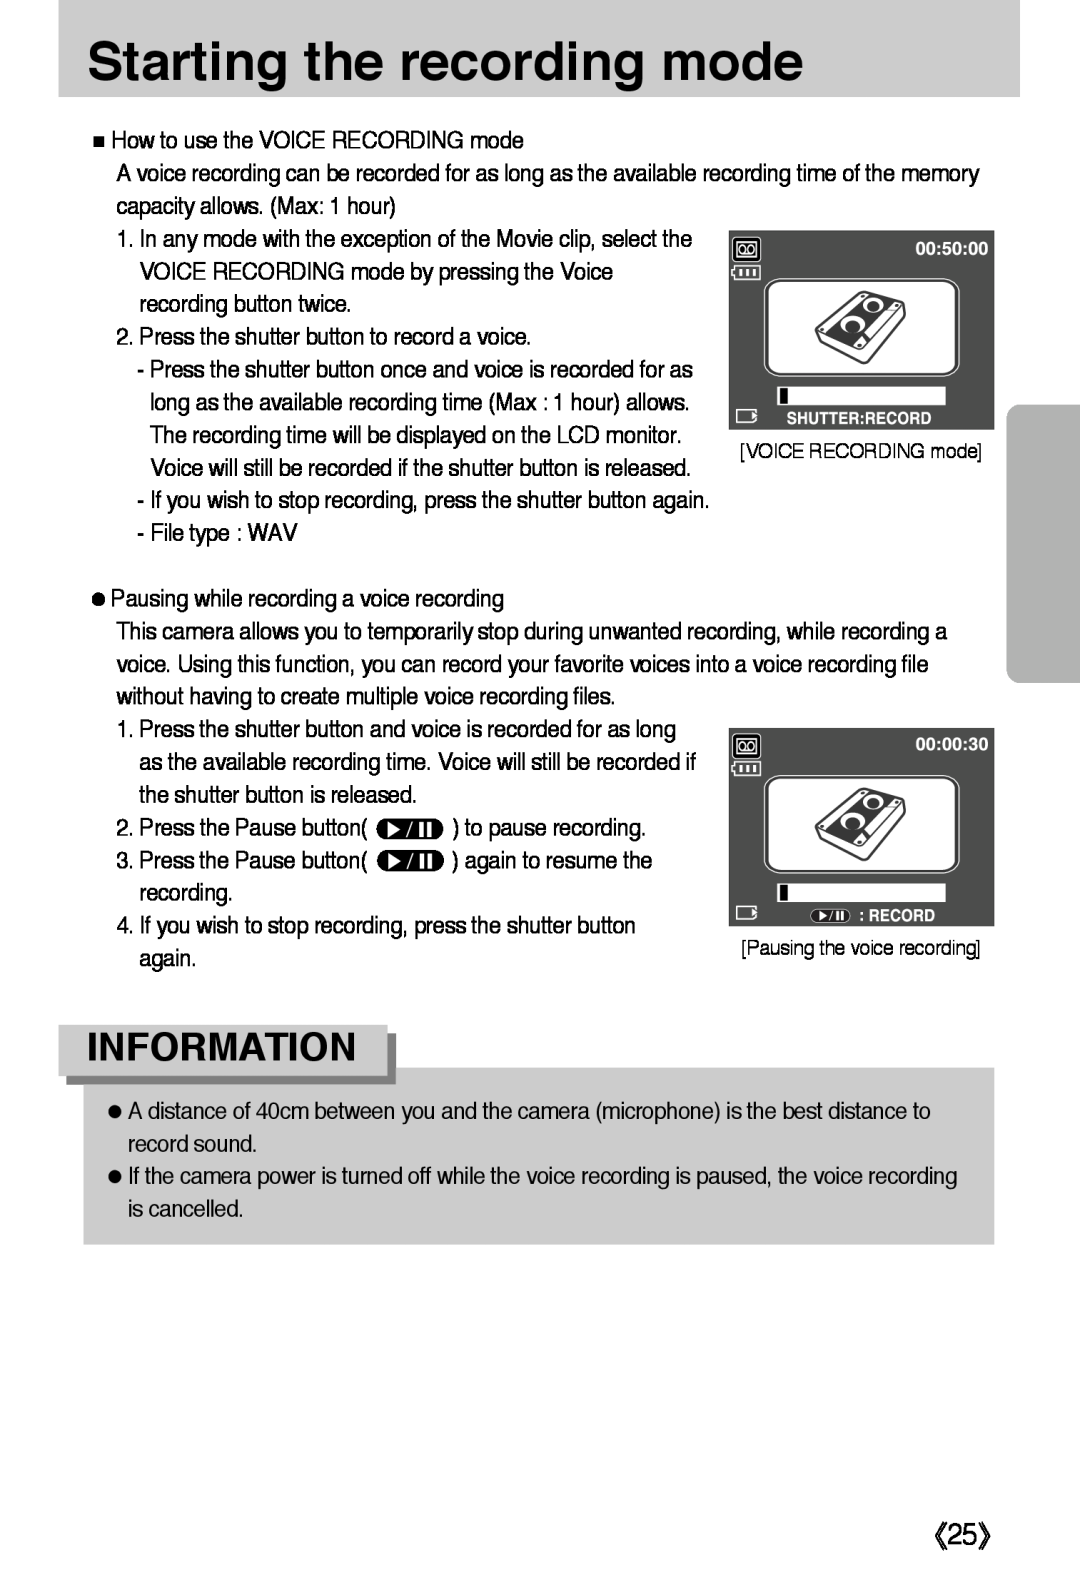 Samsung L50 user manual 《25》, Starting the recording mode, Information 